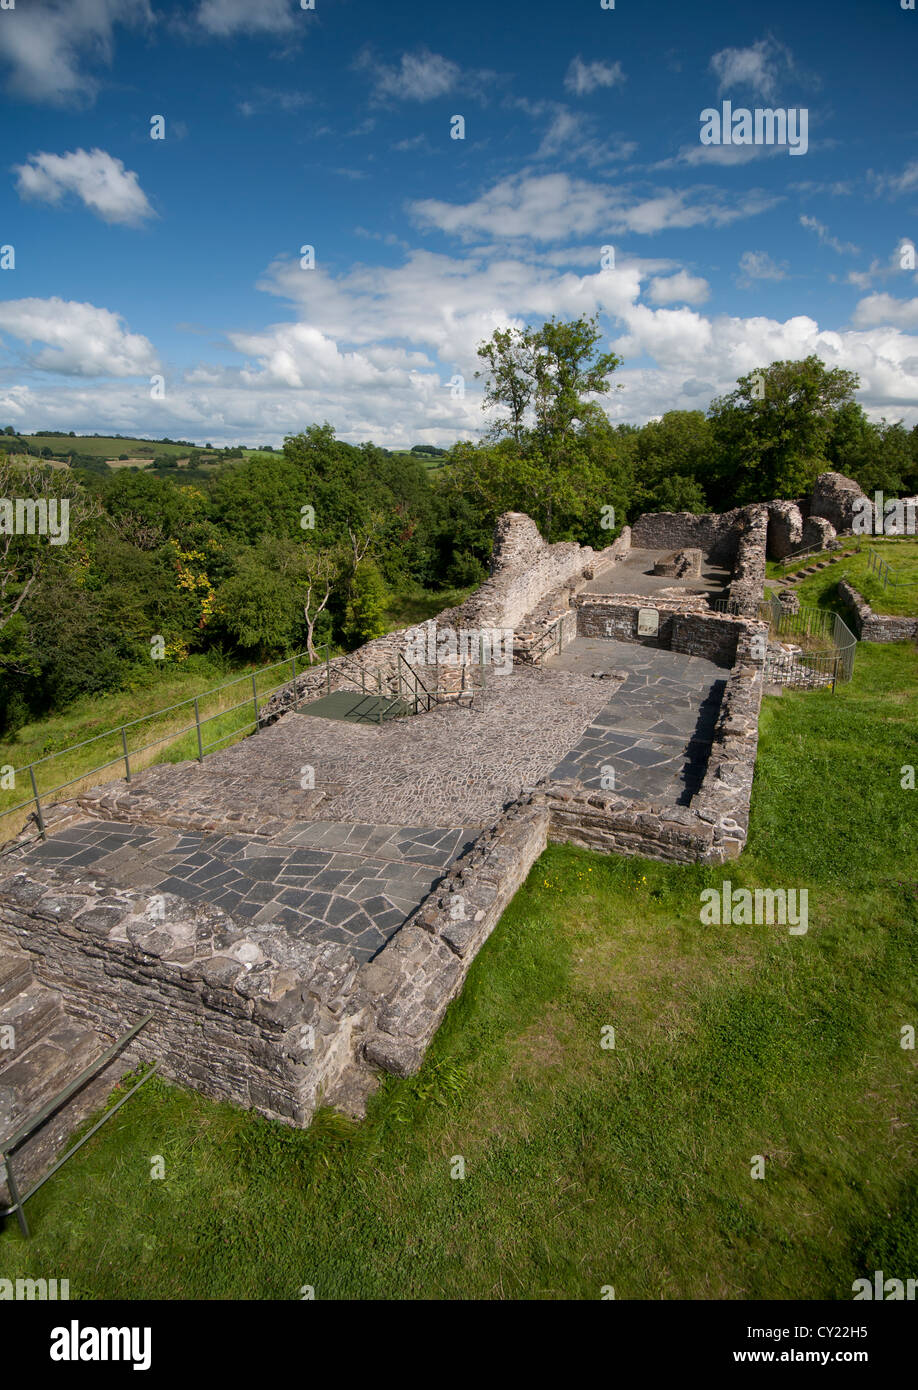 Dolforwyn Castle, recently excavated ruins in Powys, Montgomeryshire. Mid Wales.  SCO 8702 Stock Photo